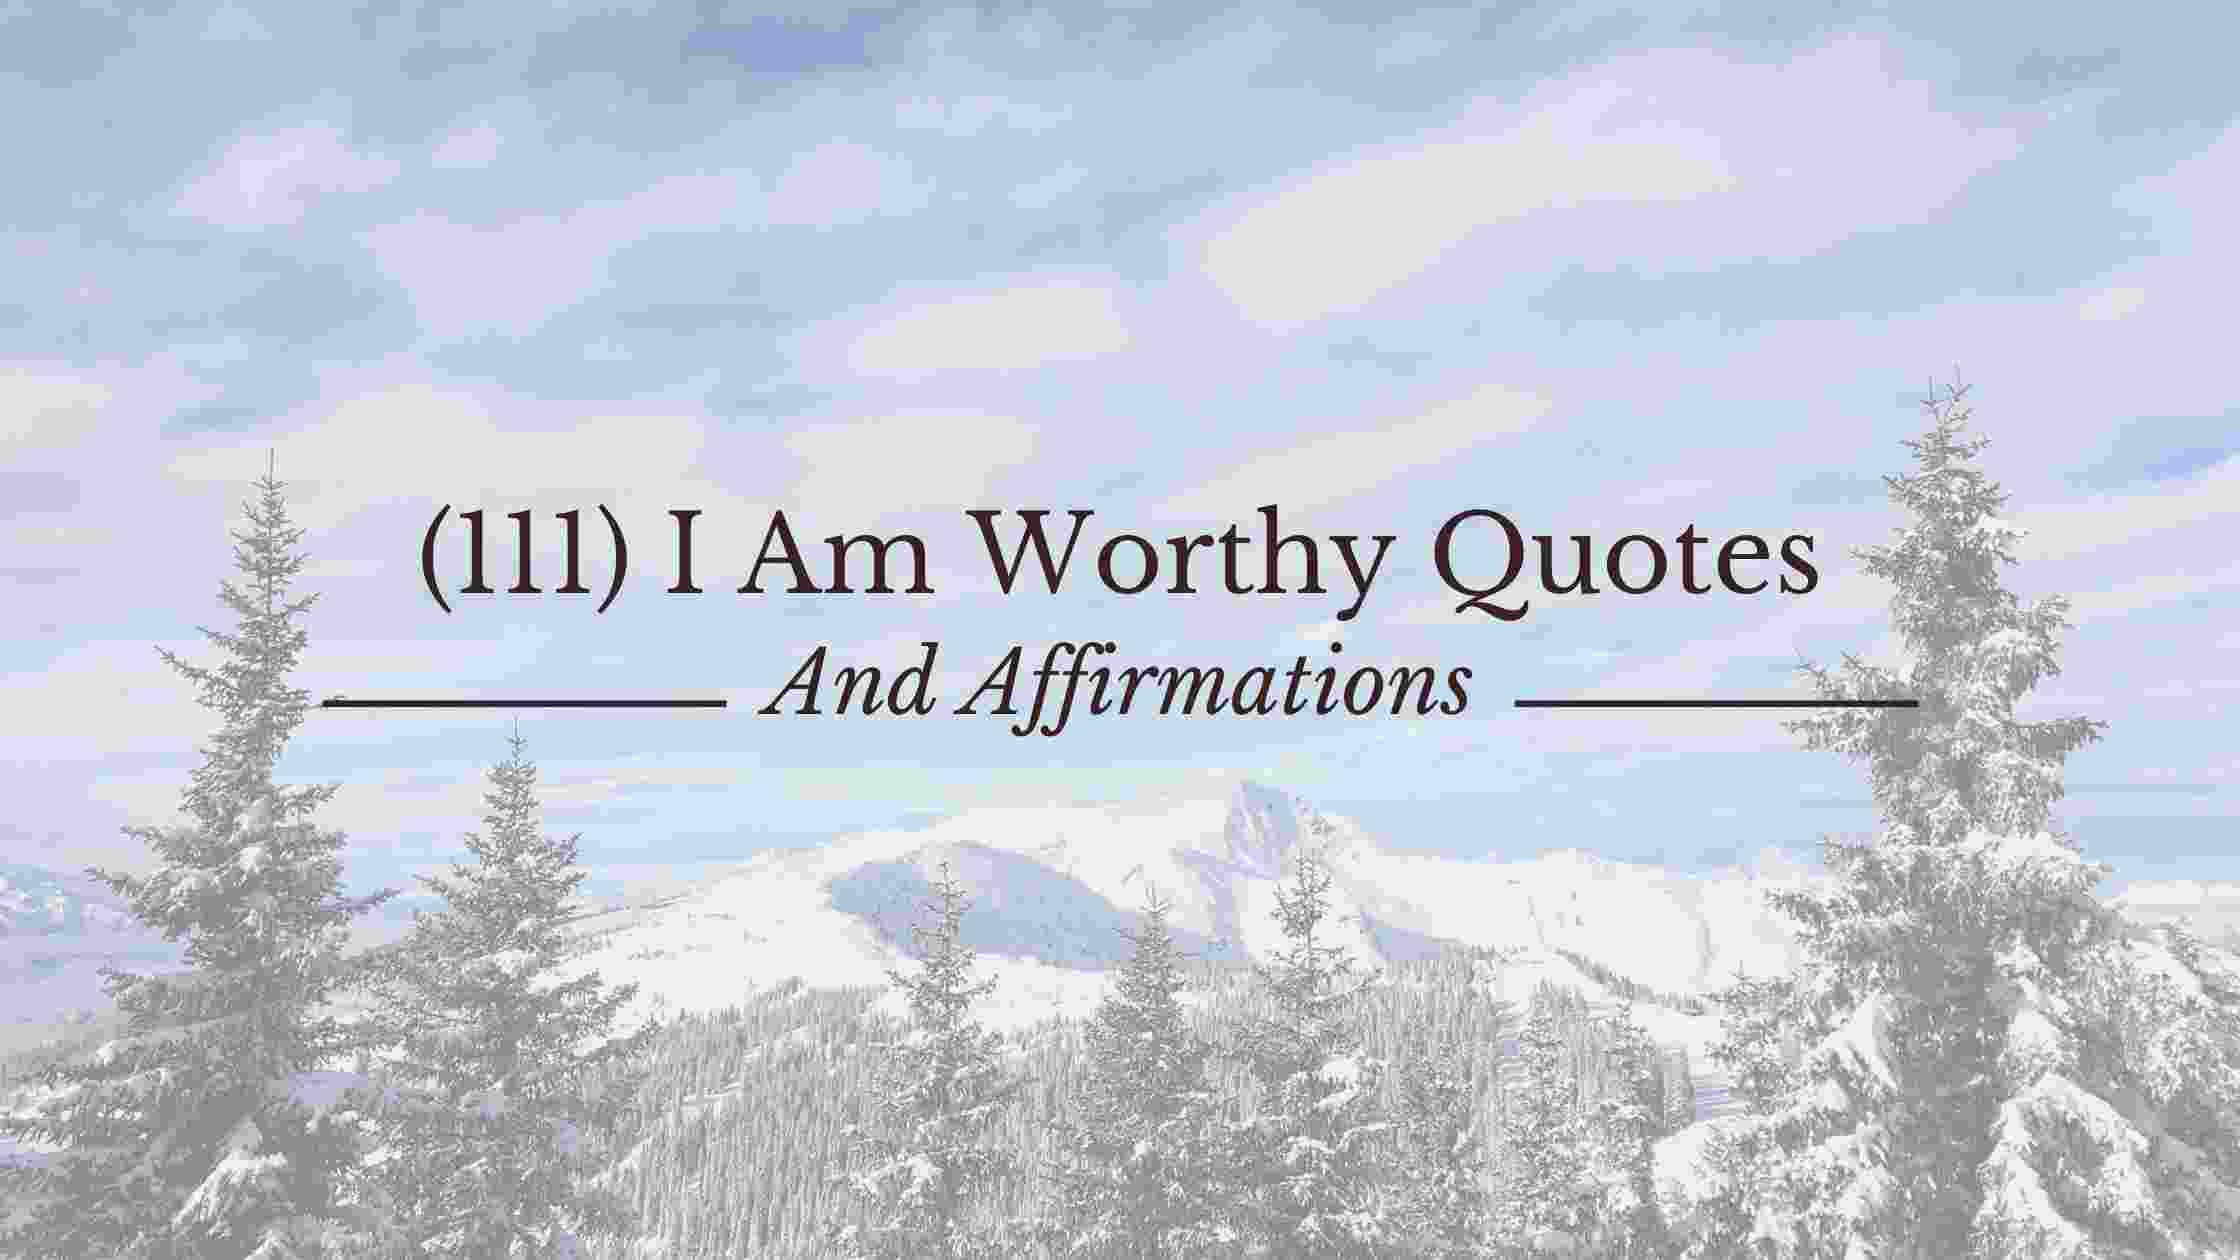 (111) I Am Worthy Quotes